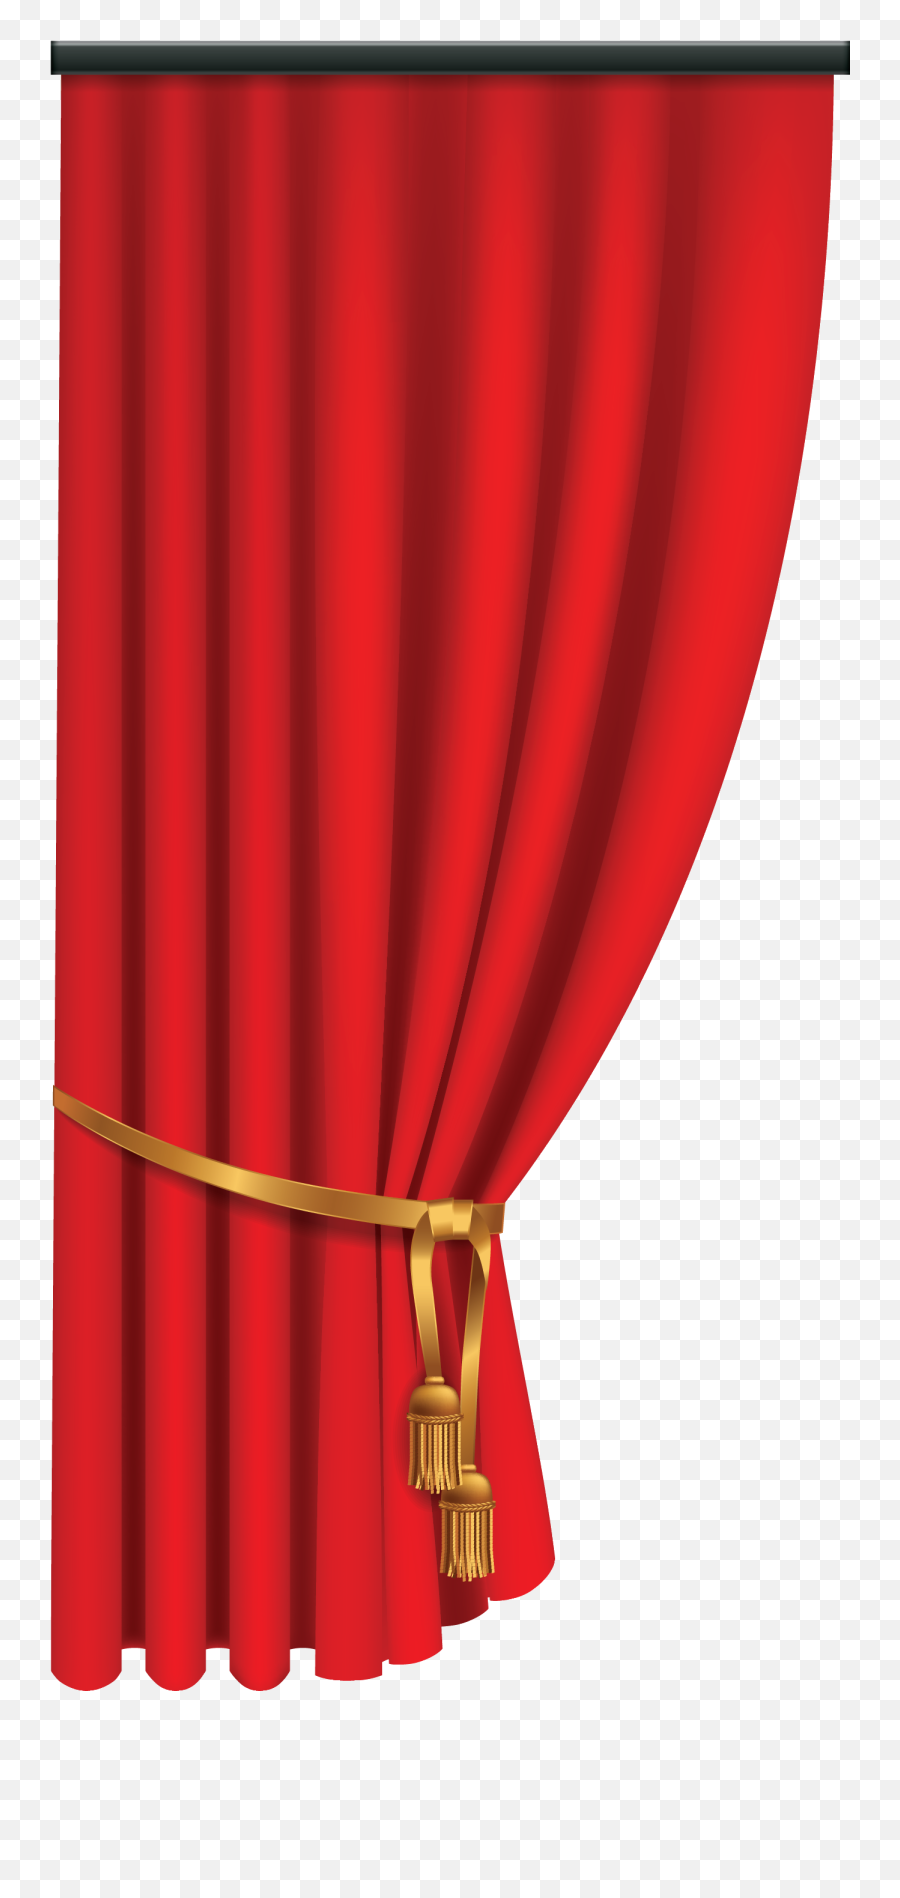 Free Curtain Png Images Transparent Background Download - Solid,Curtain Icon